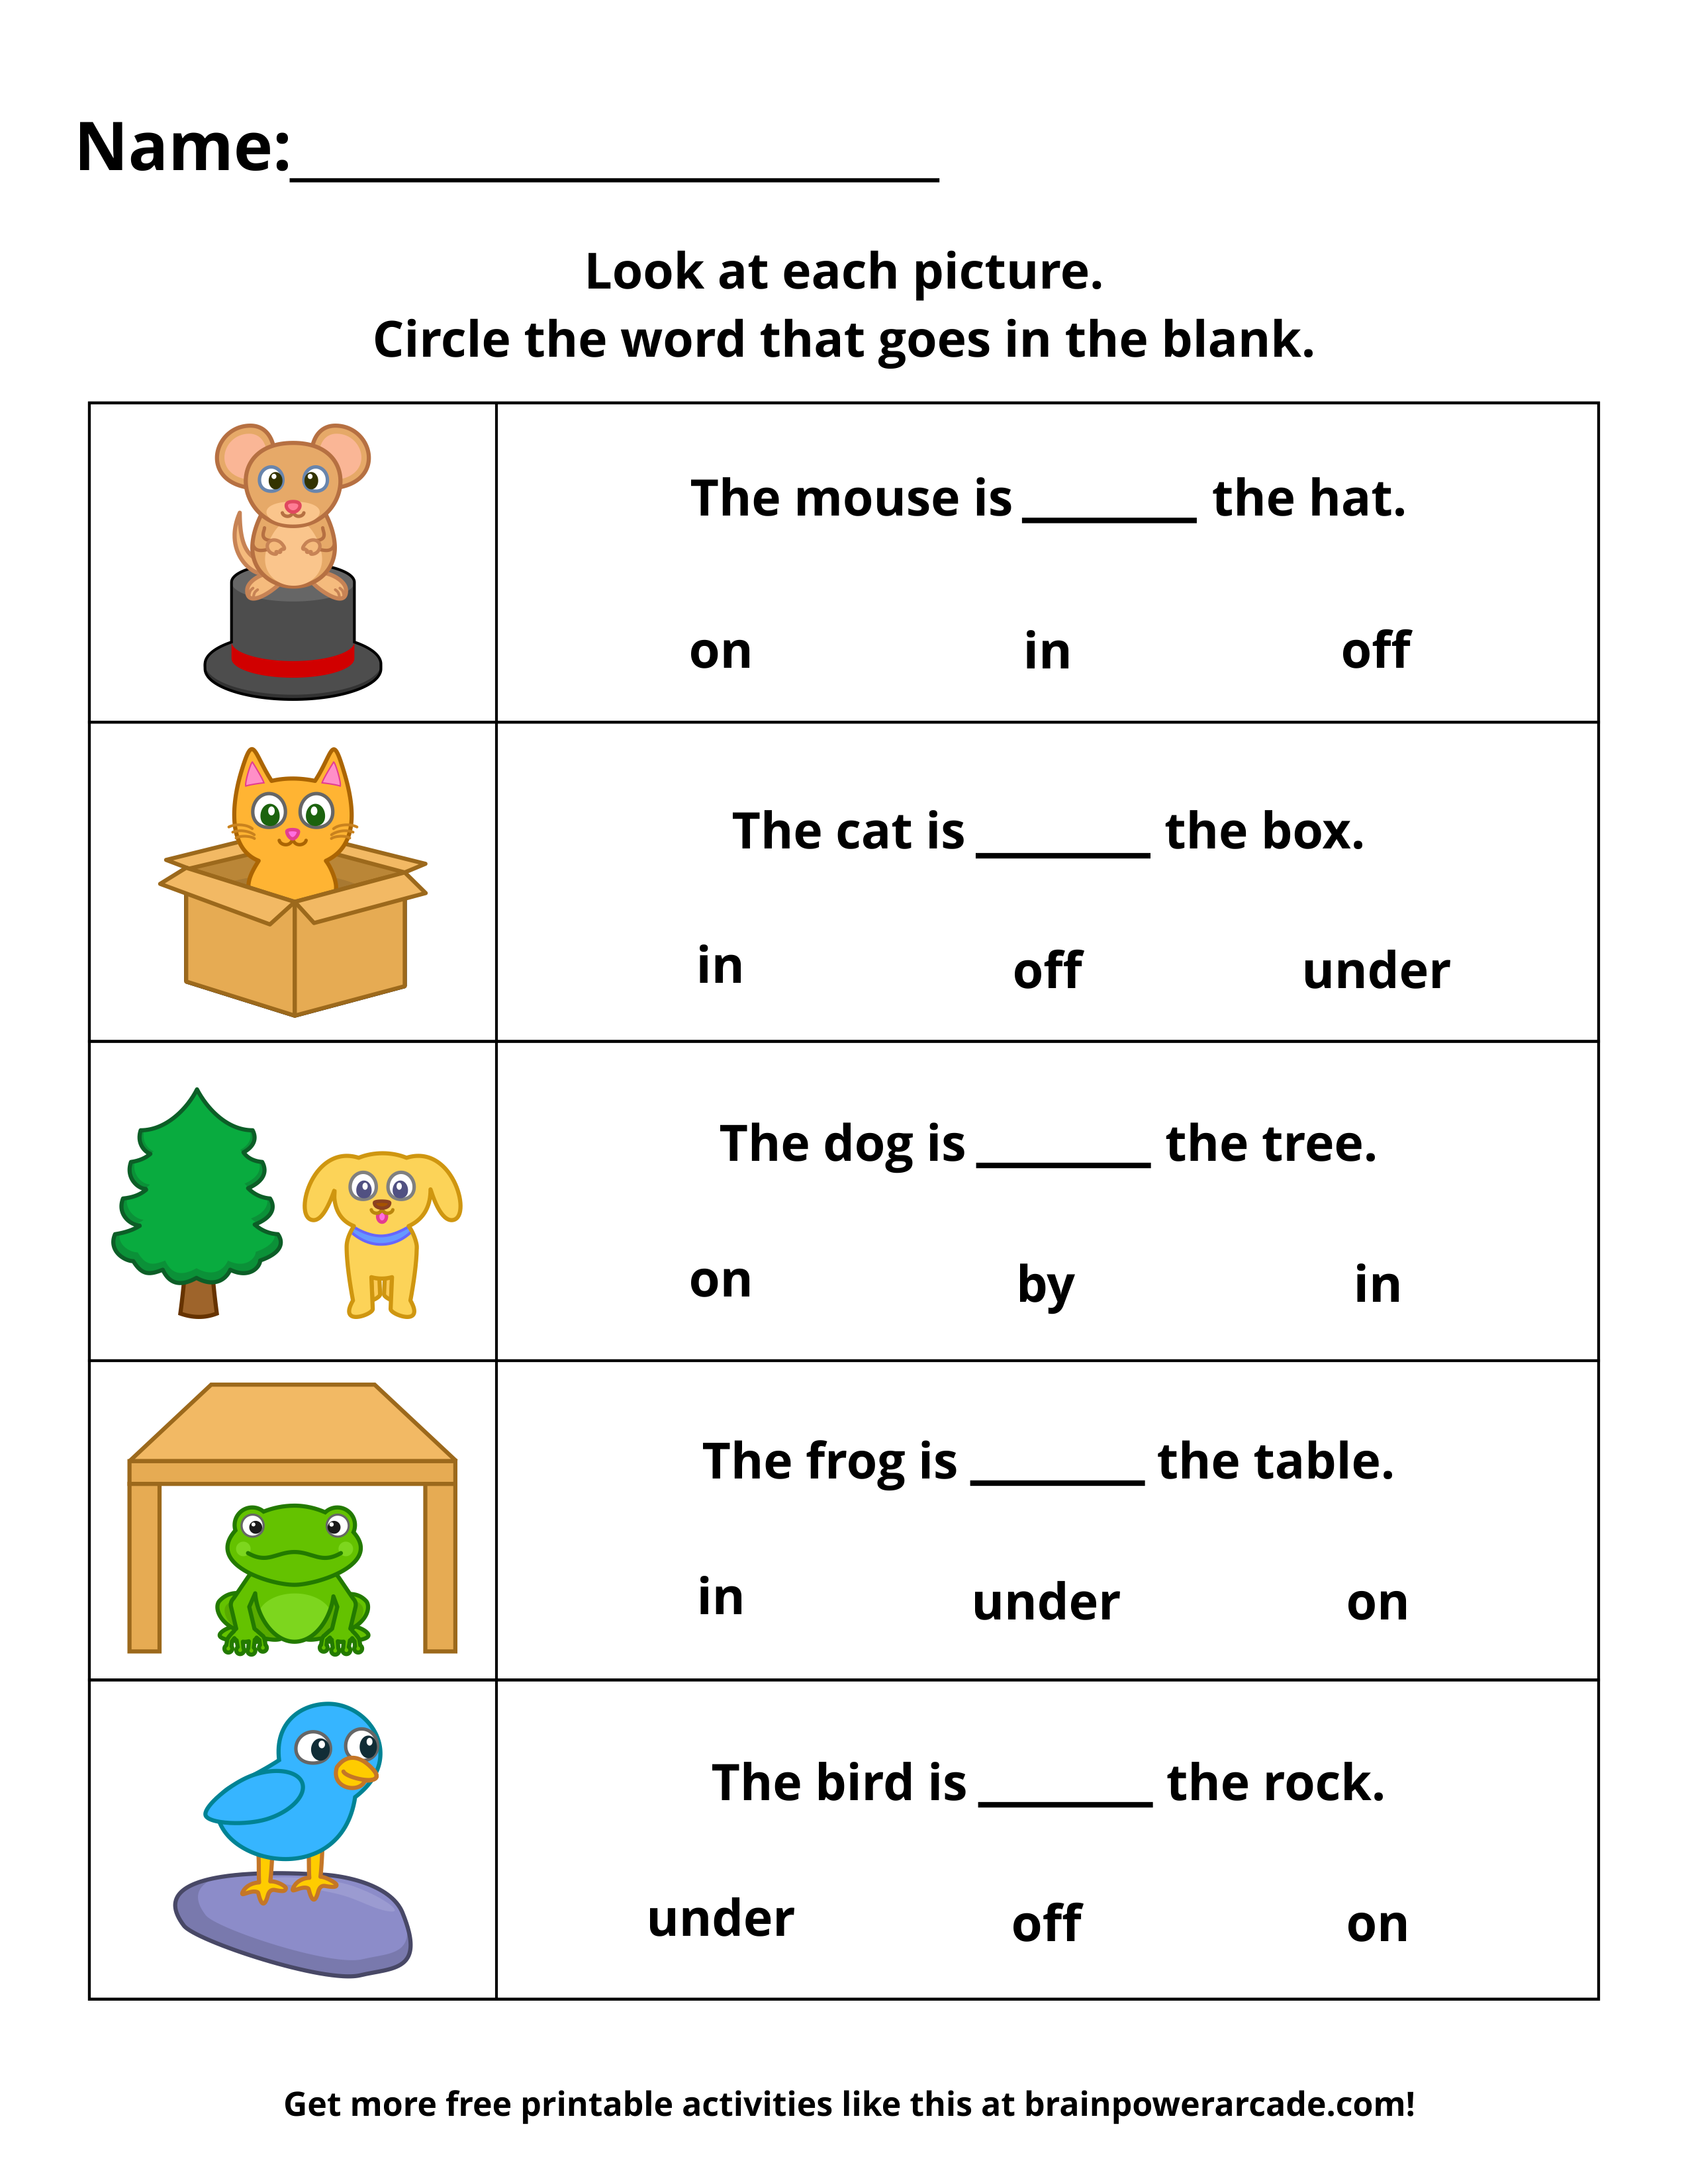 preposition-fill-in-the-blanks